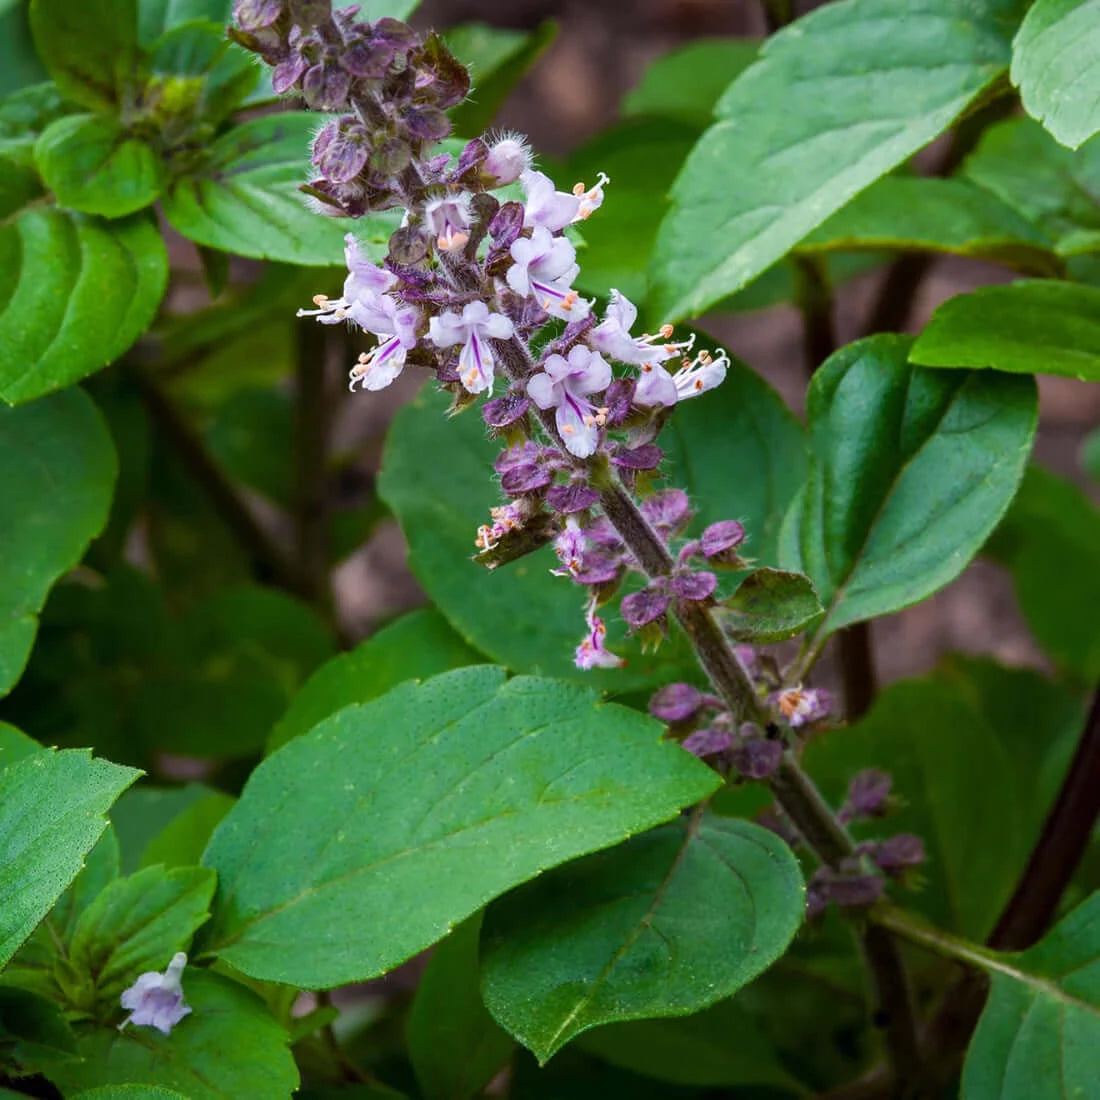 Anxiety Soother™: Holy Basil